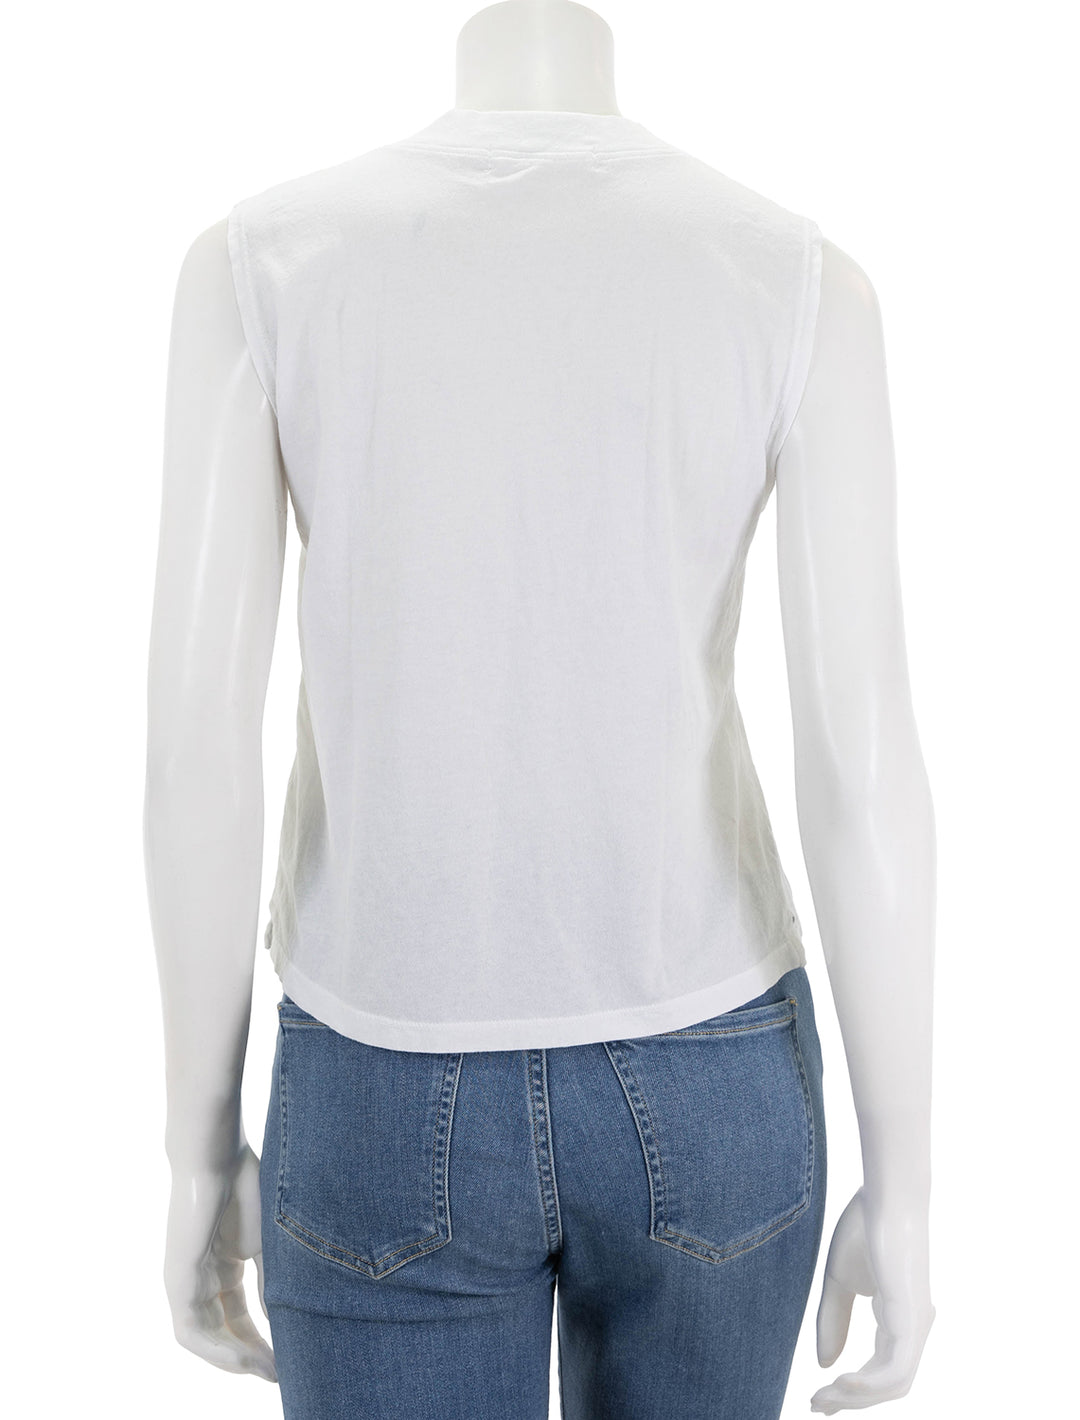 Back view of Perfectwhitetee's margot tee in white.